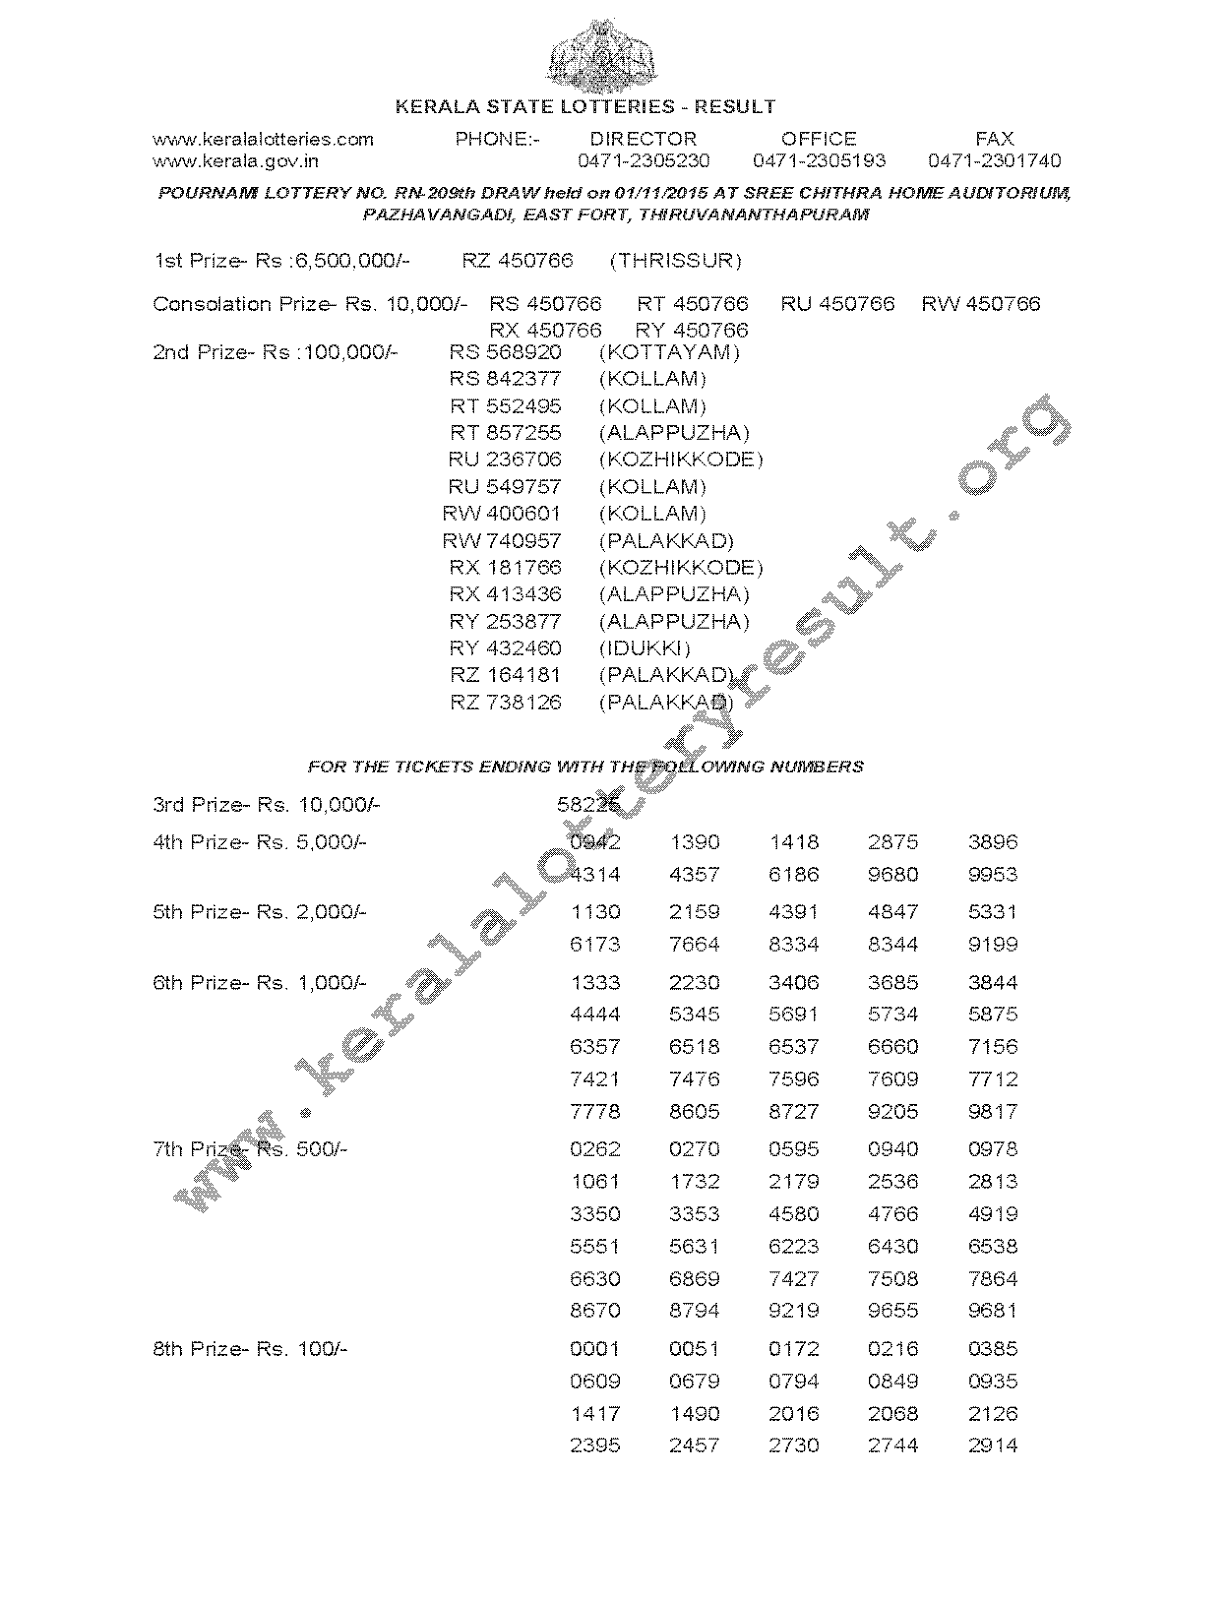 Pournami Lottery RN 209 Result 1-11-2015